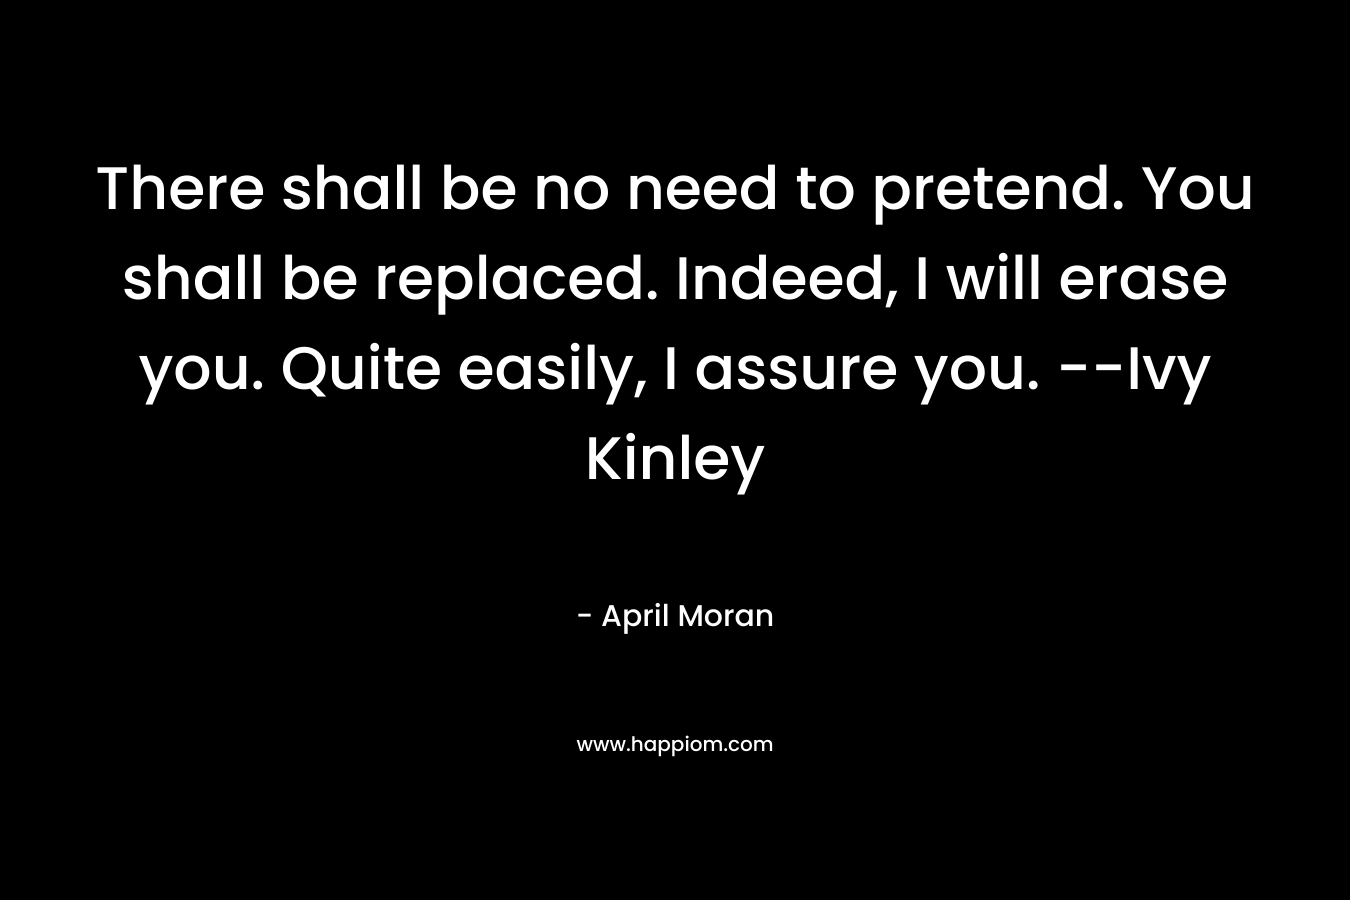 There shall be no need to pretend. You shall be replaced. Indeed, I will erase you. Quite easily, I assure you. --Ivy Kinley